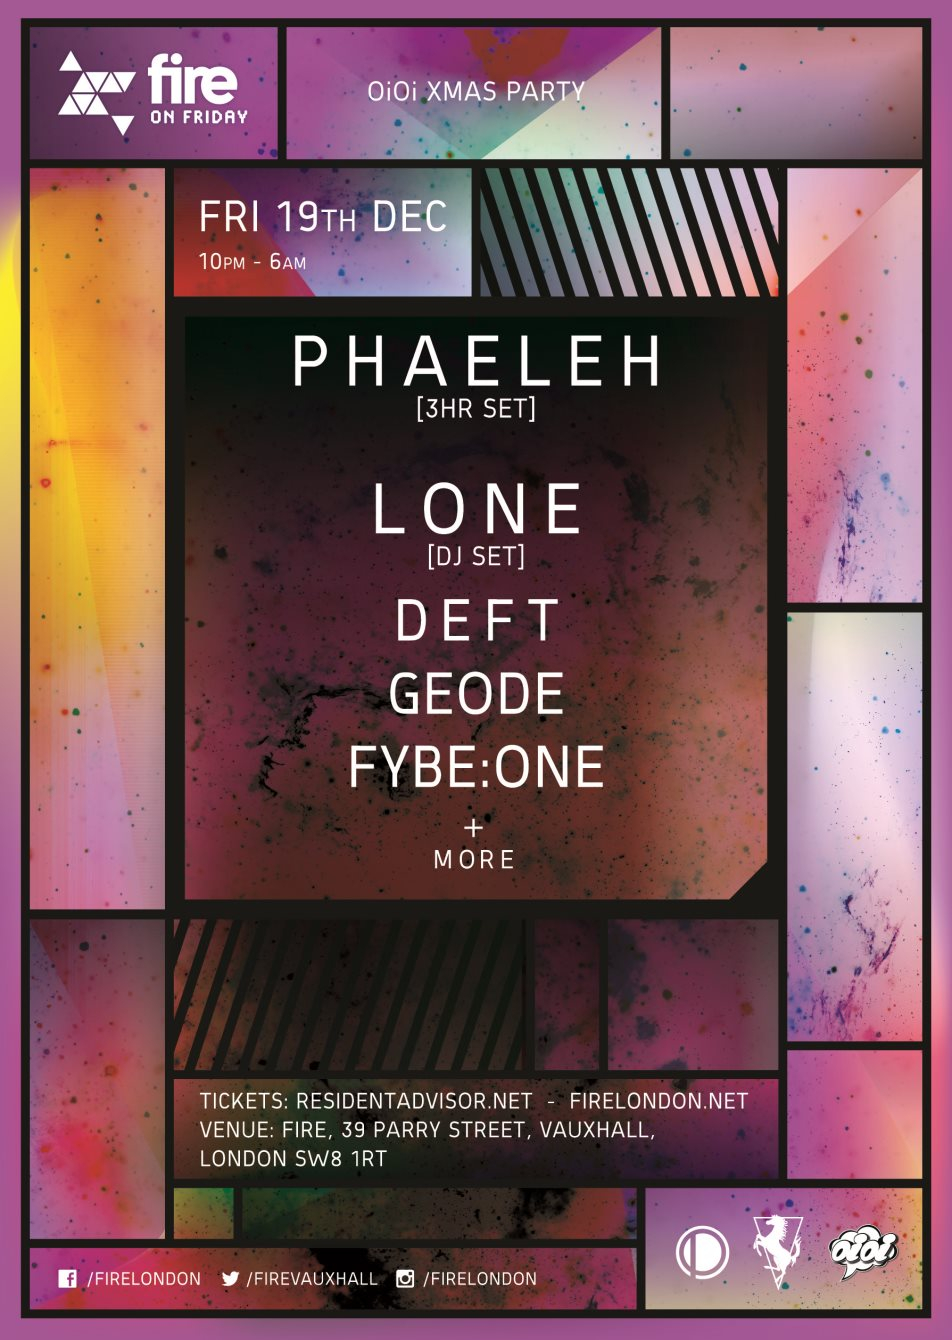 Oioi Xmas Party with Phaeleh 3hr Set, Lone, Deft, Geode & Fybe:One - Flyer front